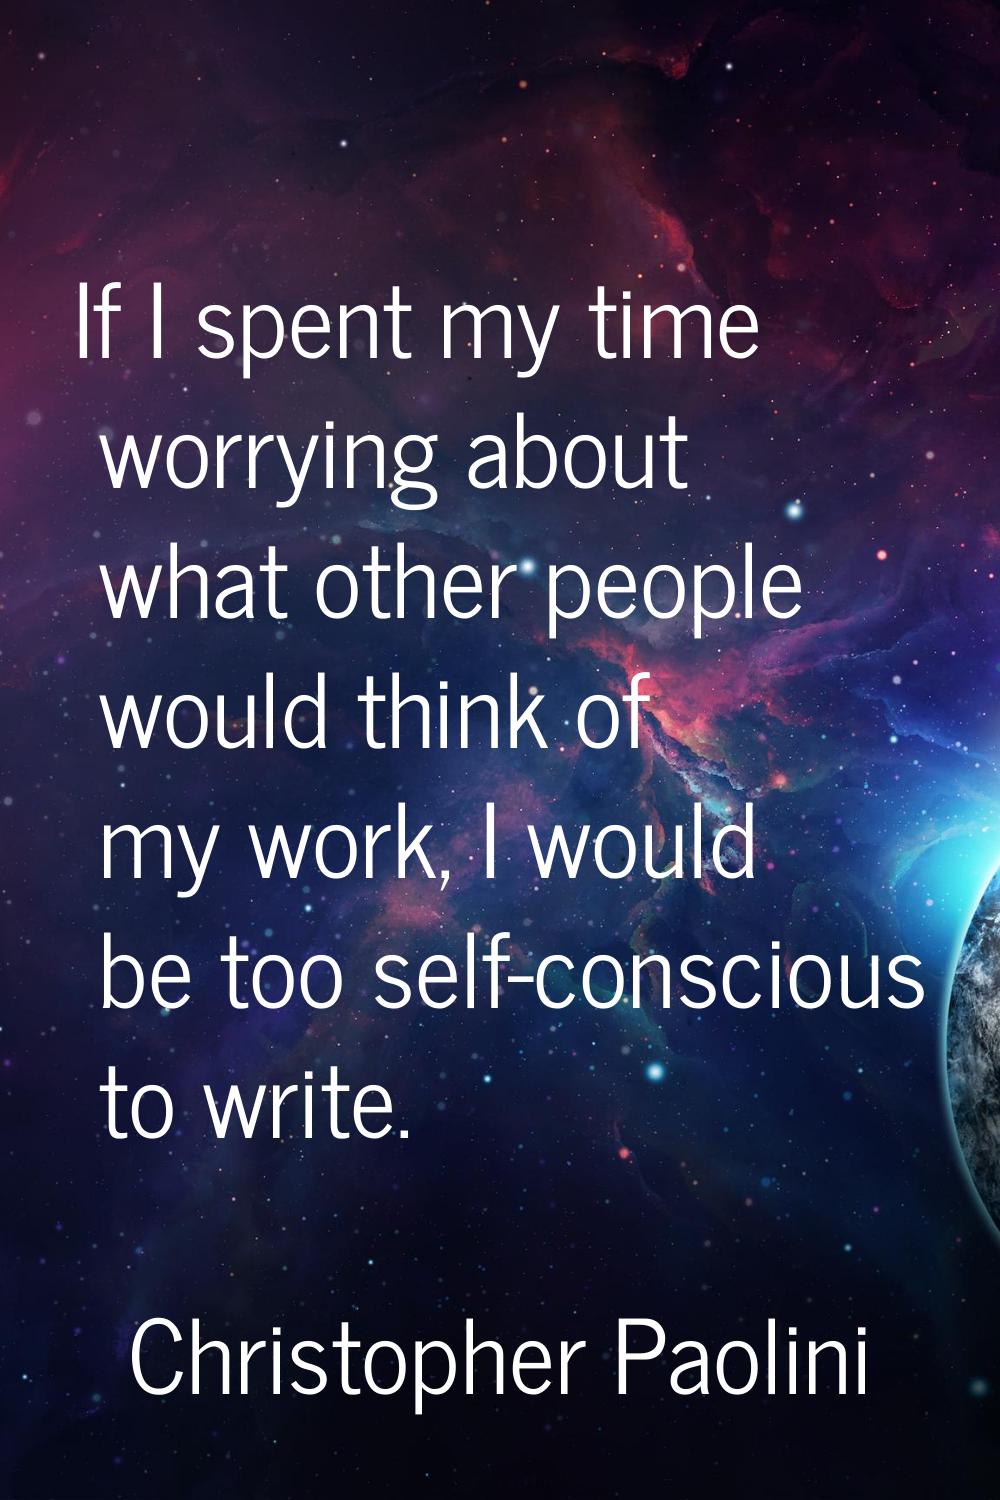 If I spent my time worrying about what other people would think of my work, I would be too self-con